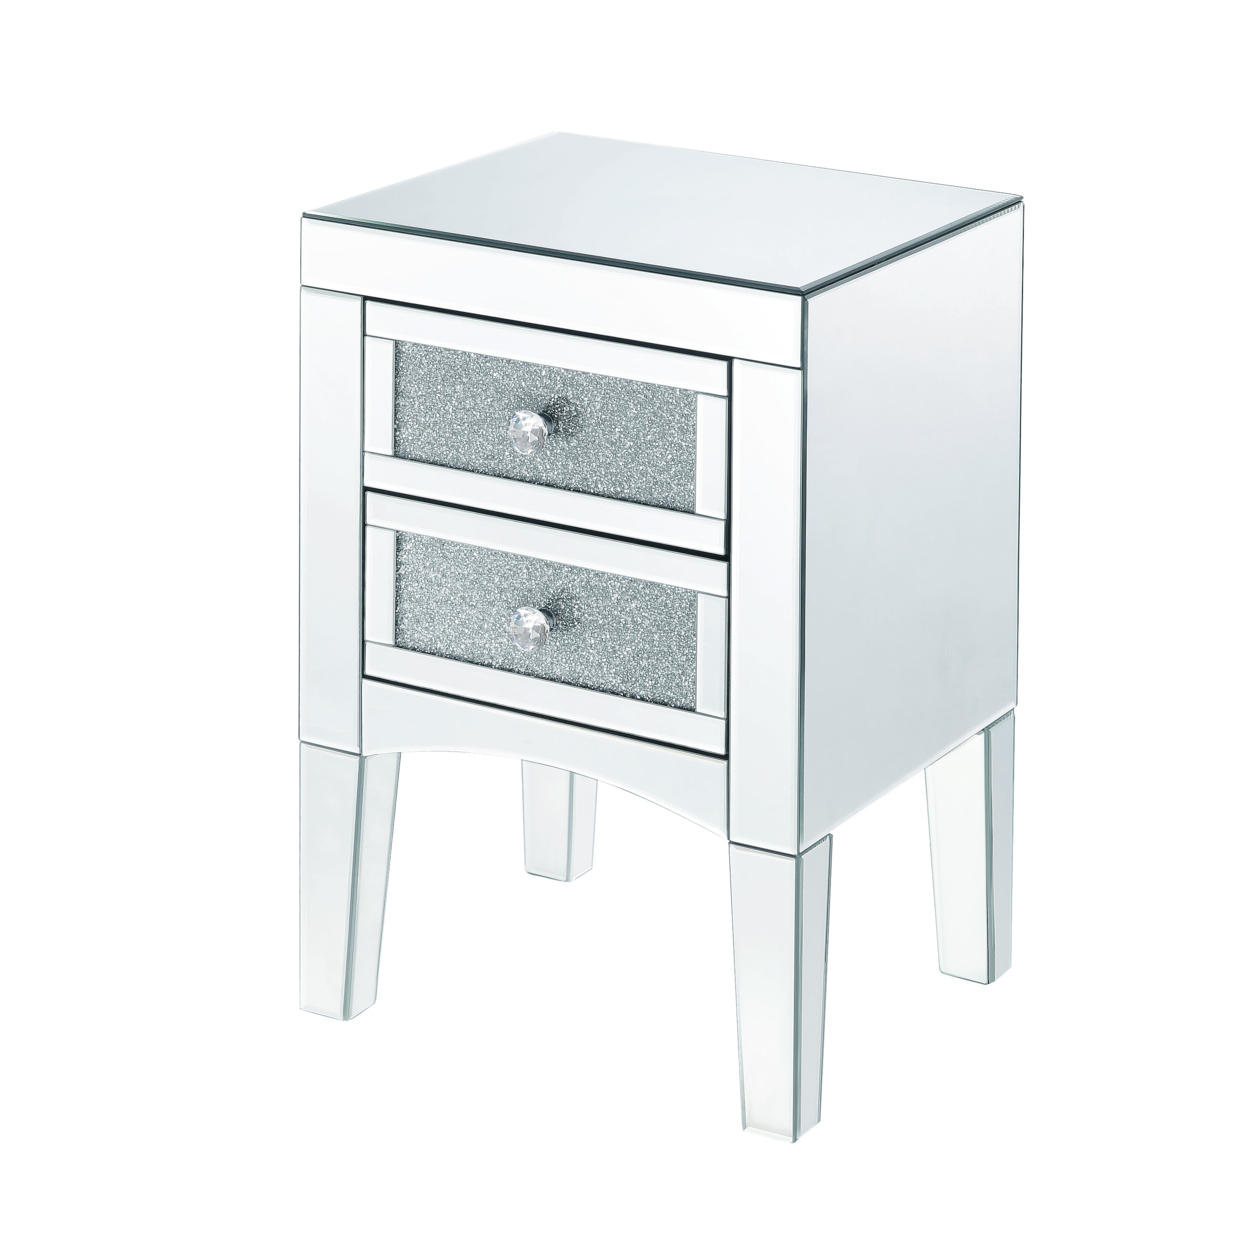 Wooden Night Table With 2 Spacious Drawers And Tapered Legs, Silver- Saltoro Sherpi